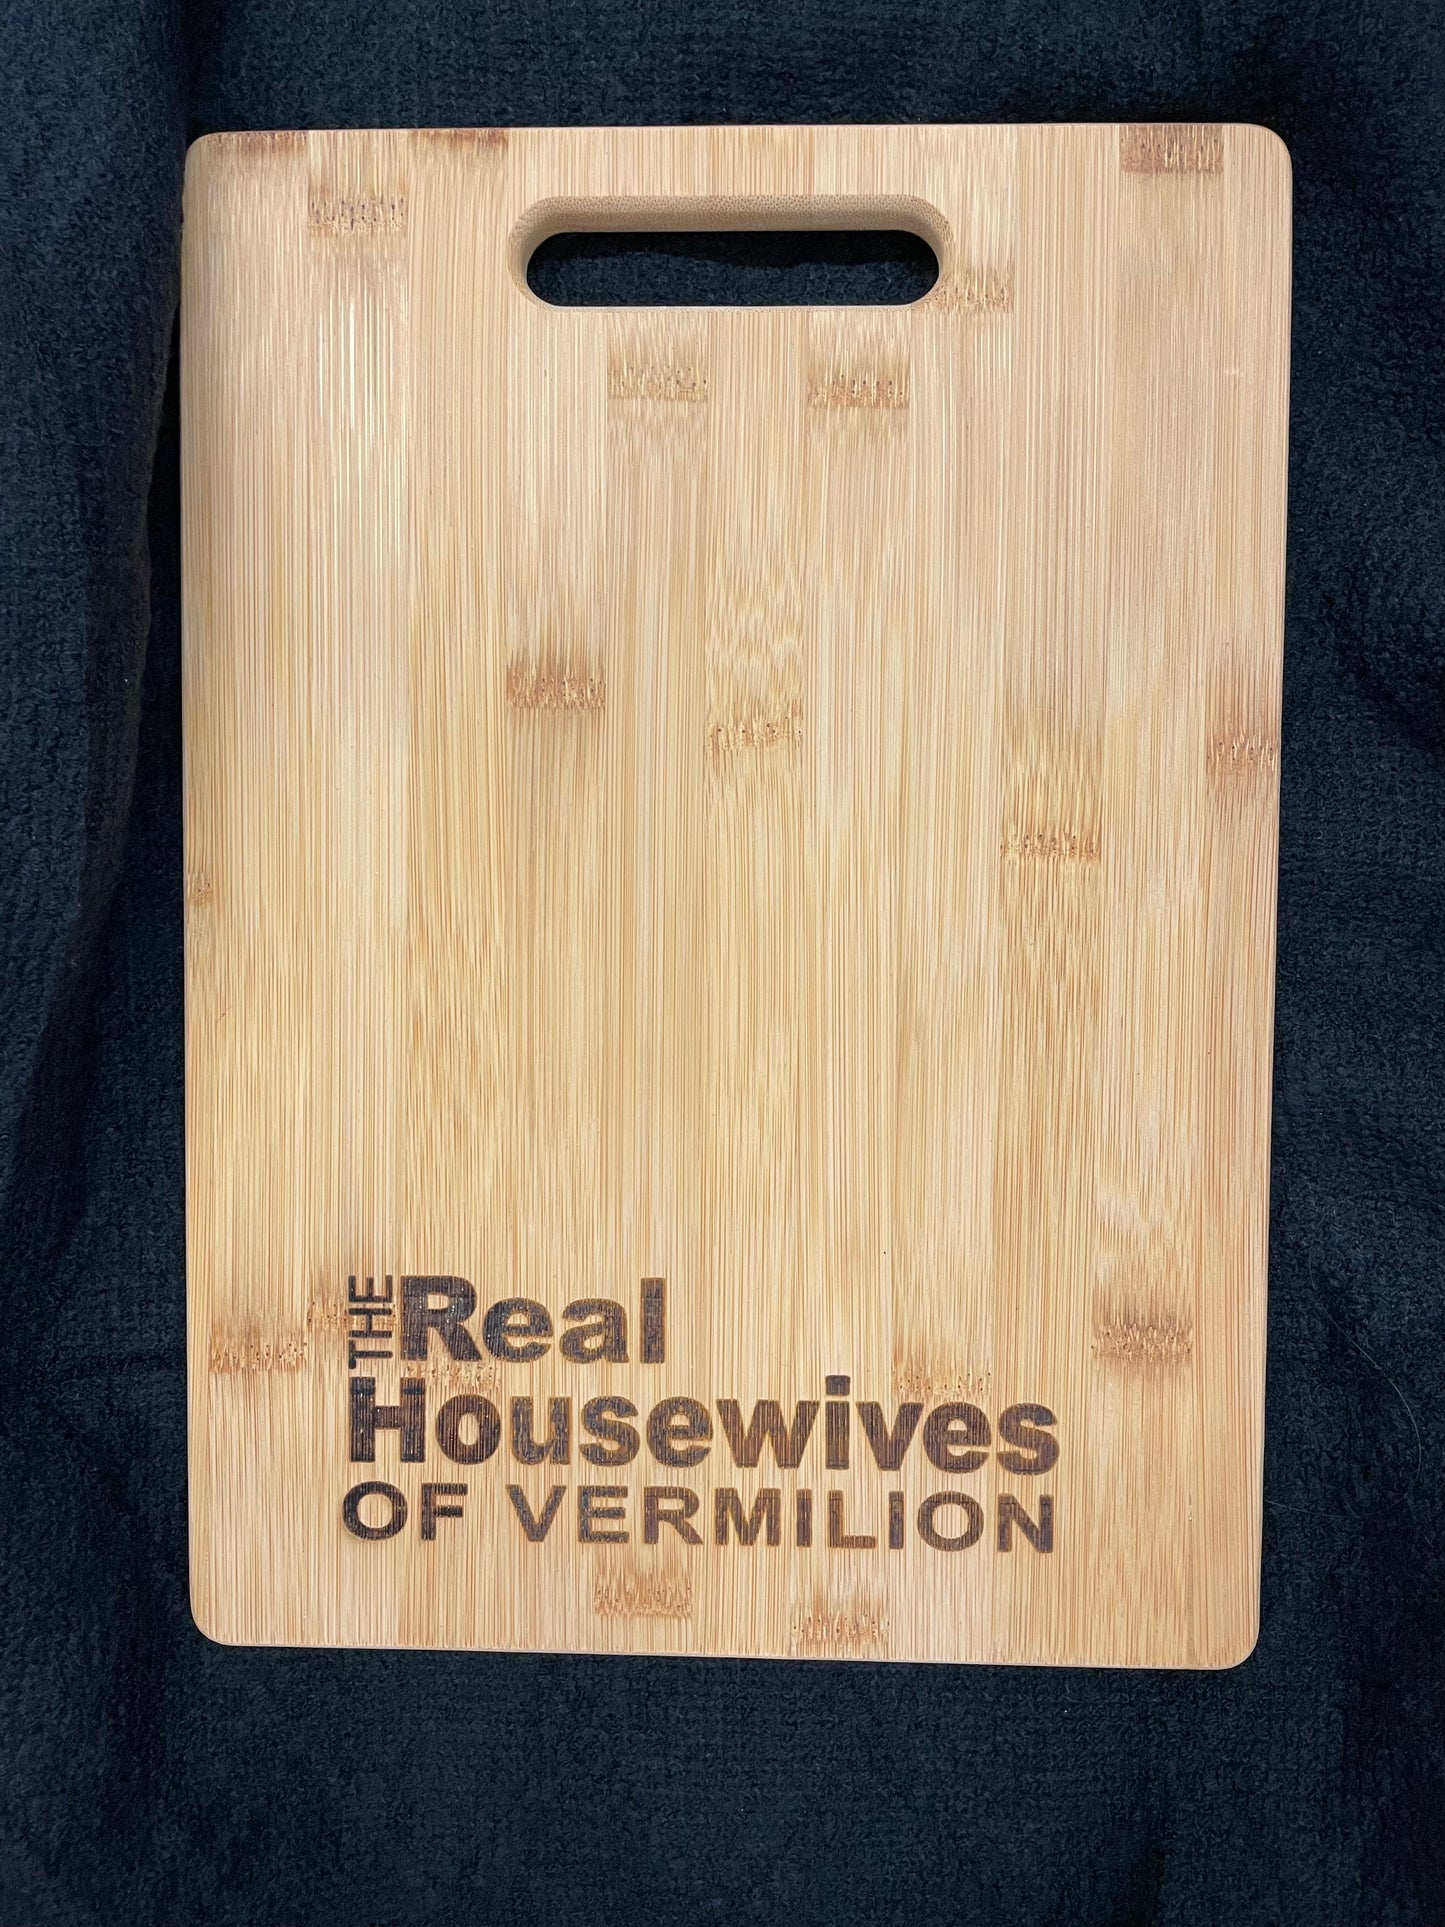 The Real Housewives Cutting Board